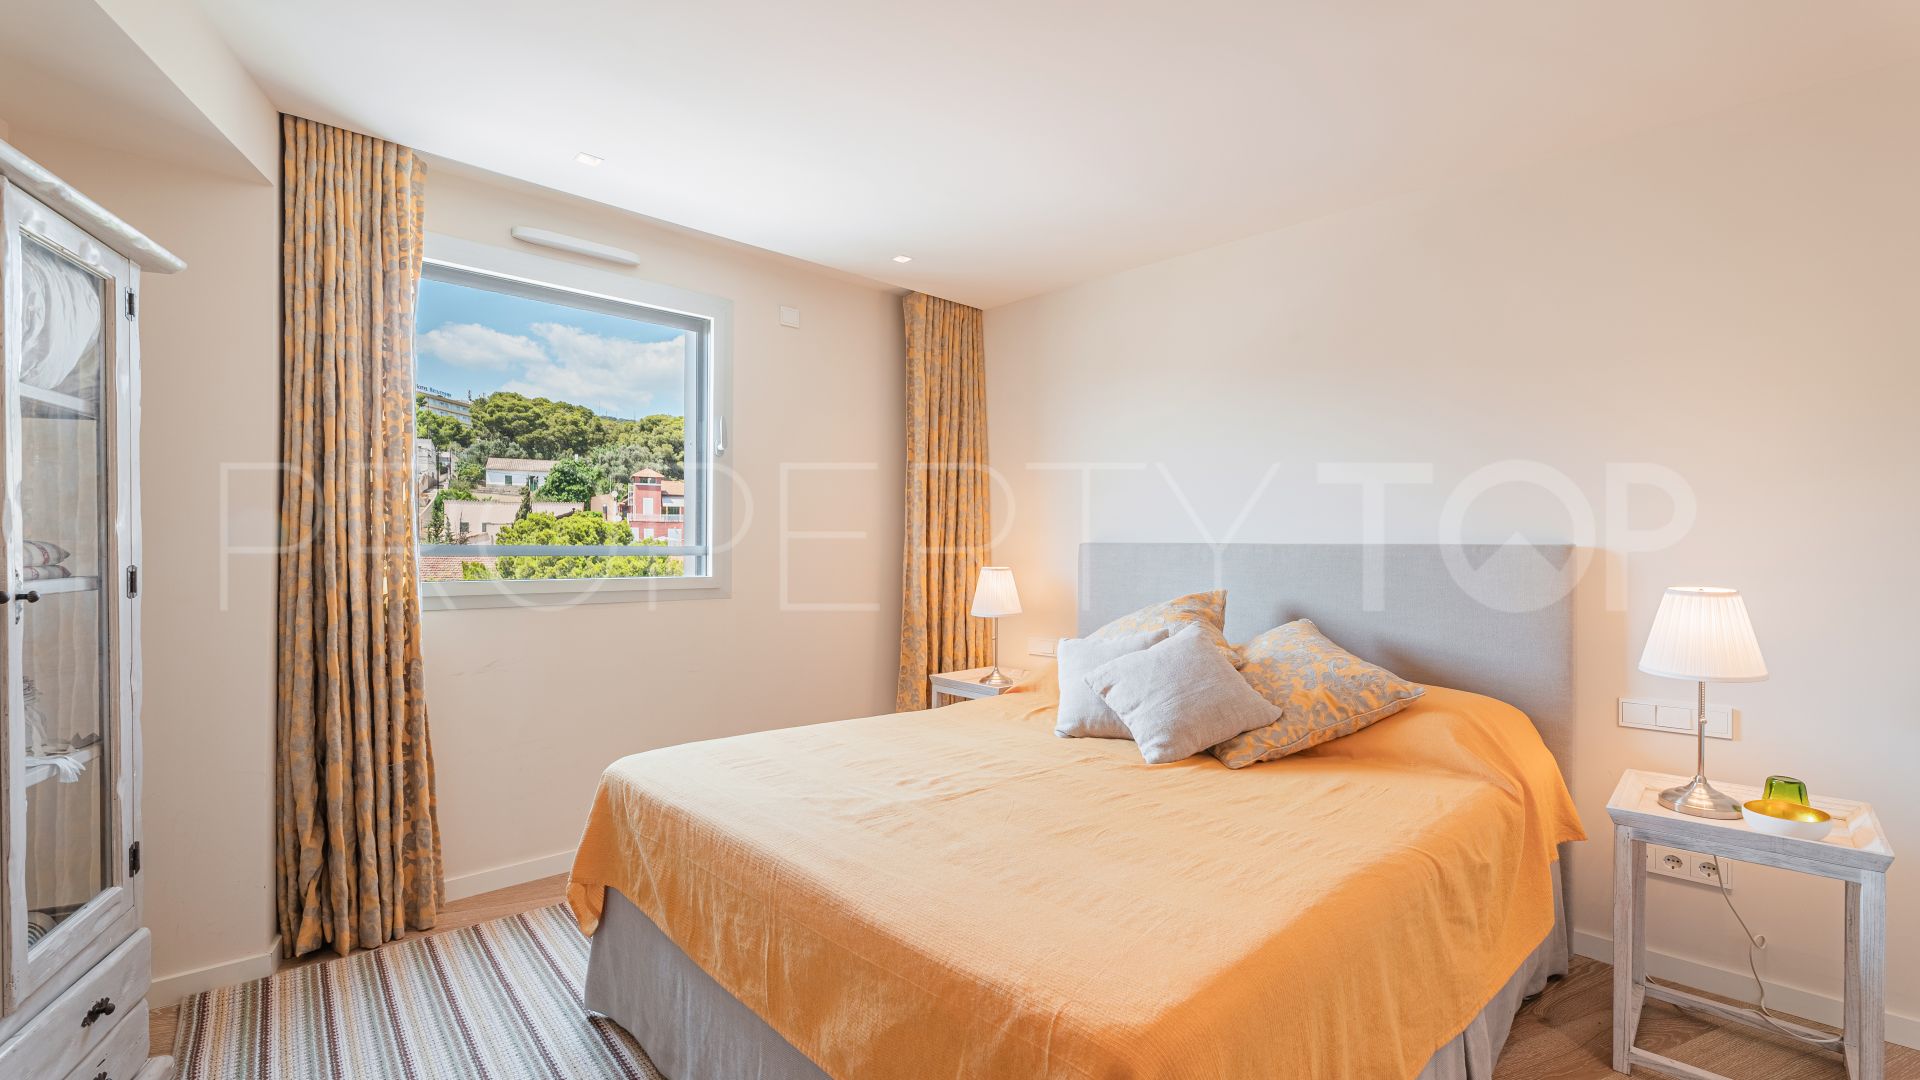 For sale Sant Agusti apartment with 3 bedrooms